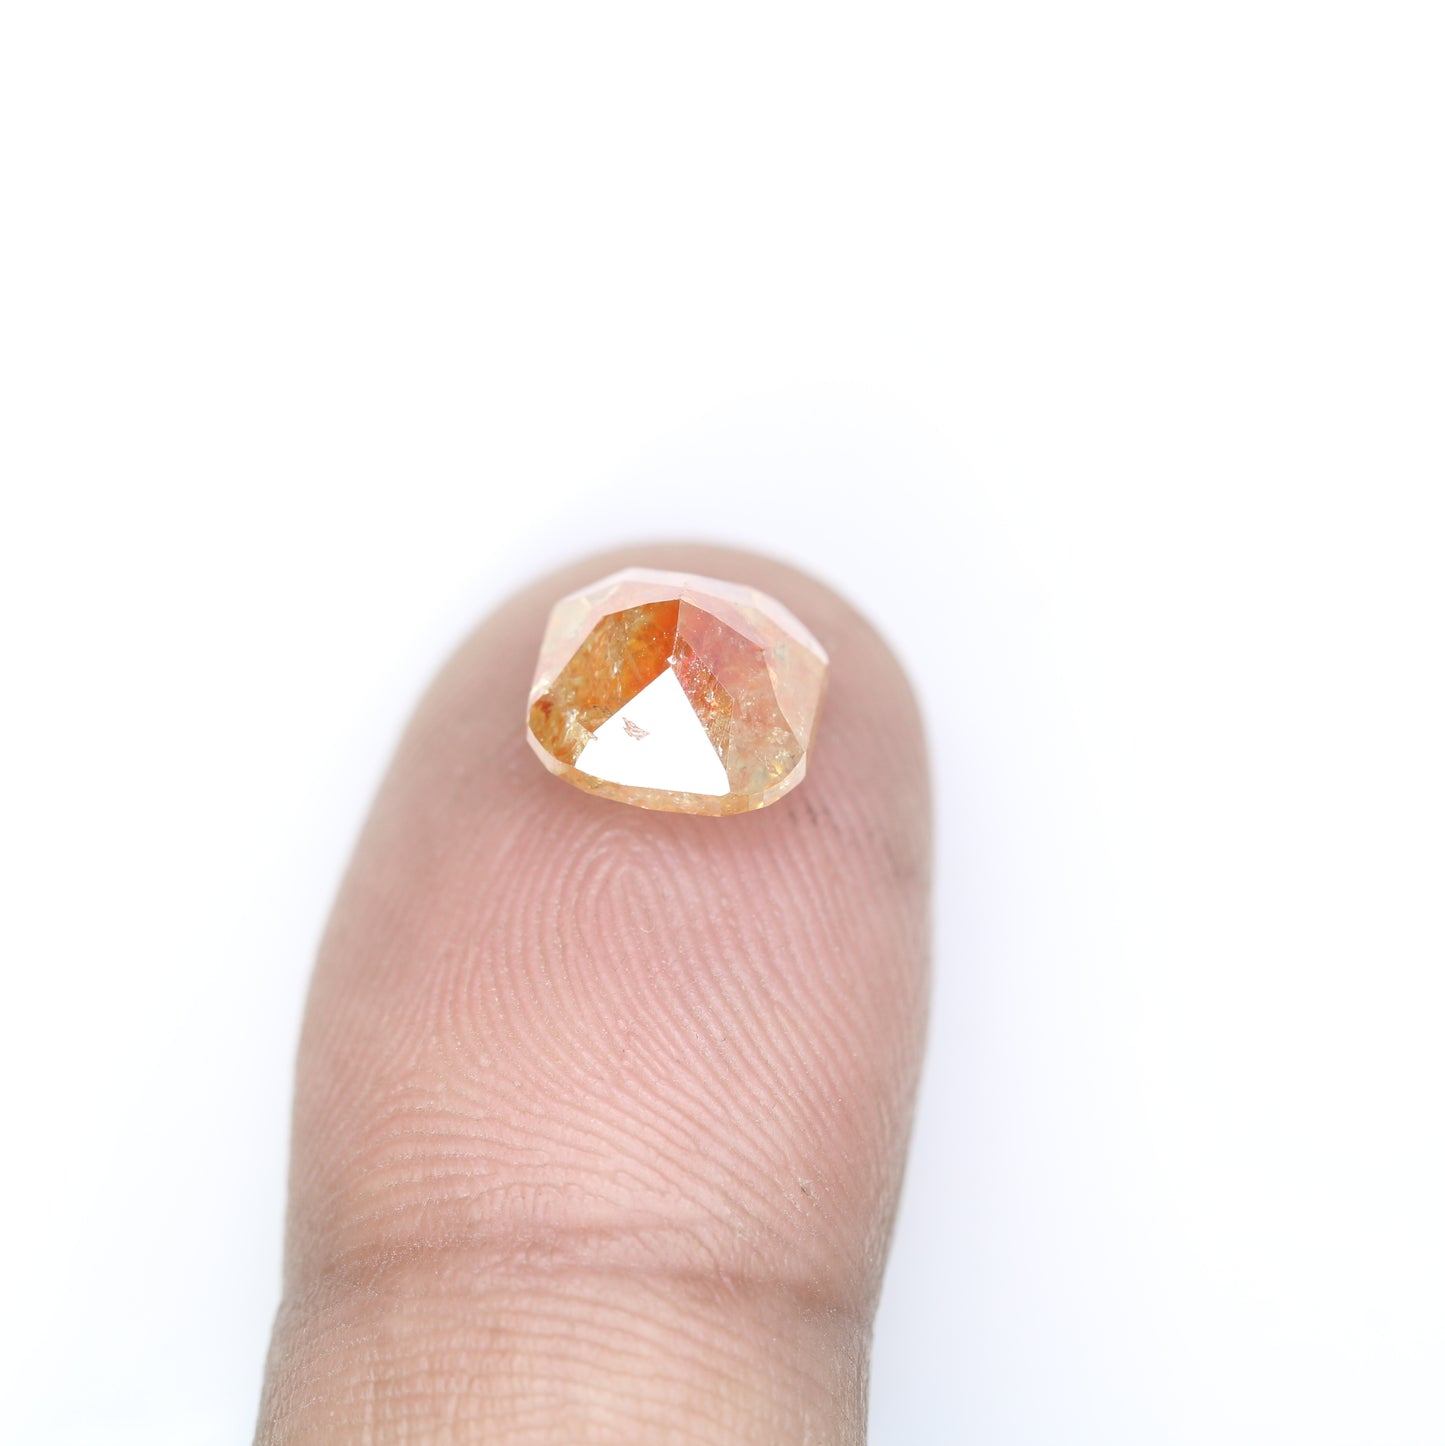 3.46 CT Natural Loose Peach Color Cushion Shape Diamond for Engagement Ring